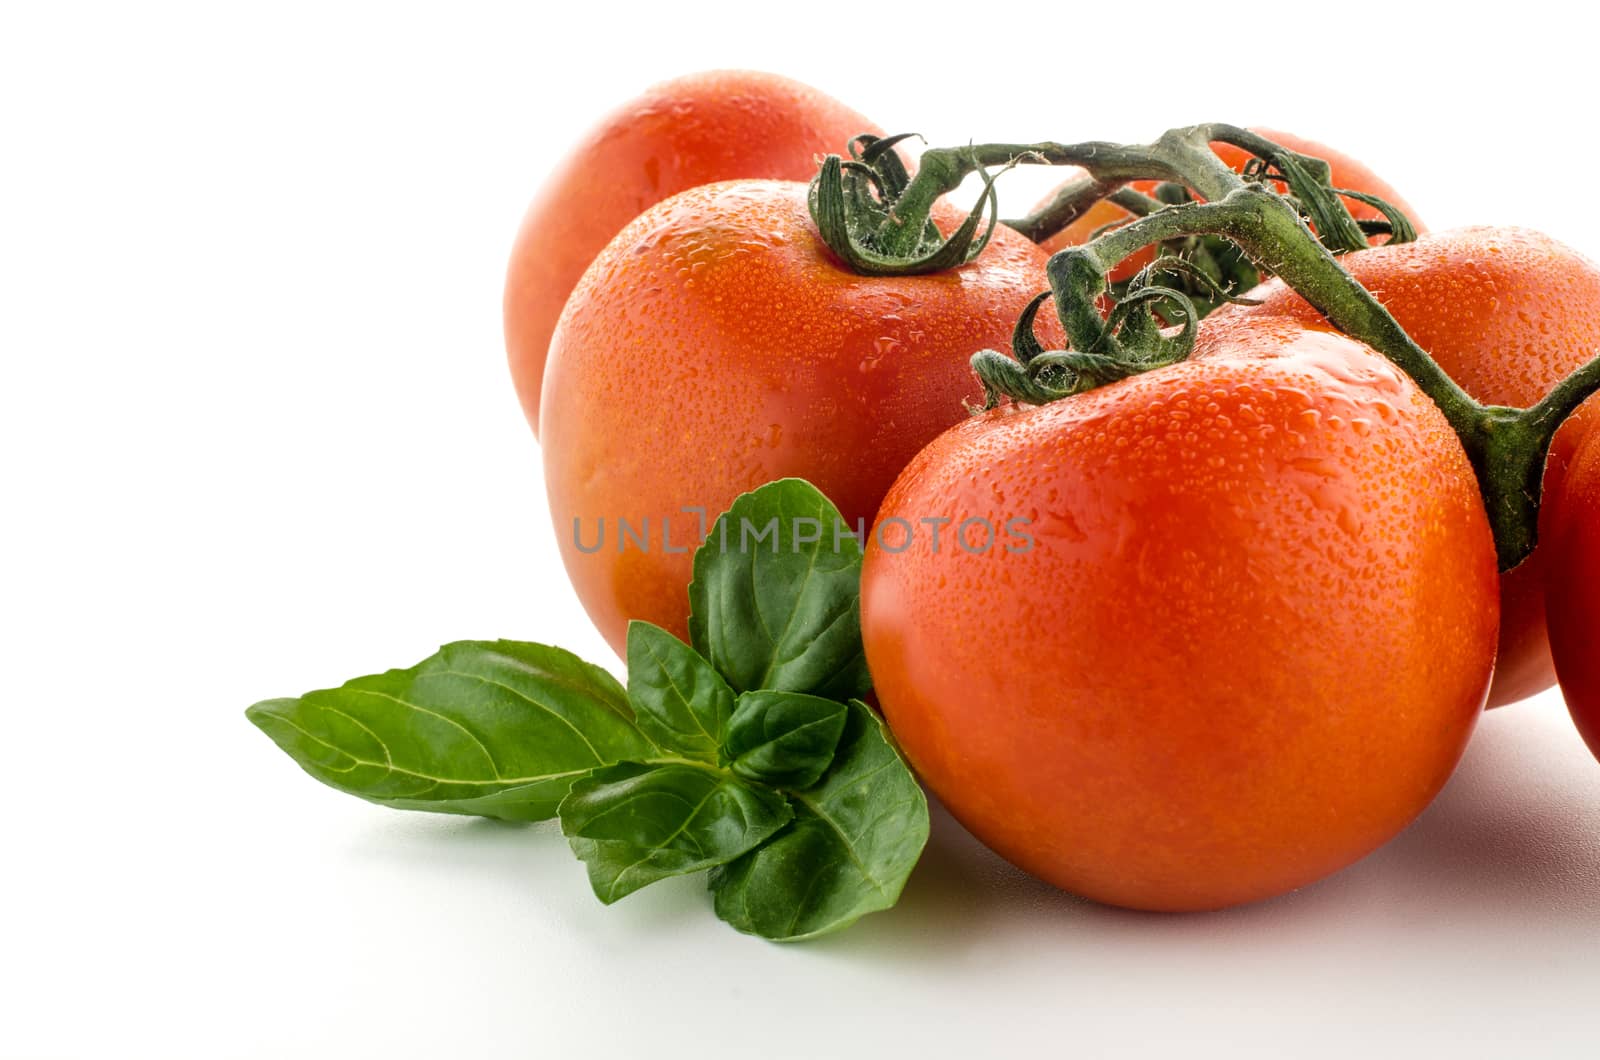 Agriculture: fresh ripe tomatoes, isolated on white background with basil leafs